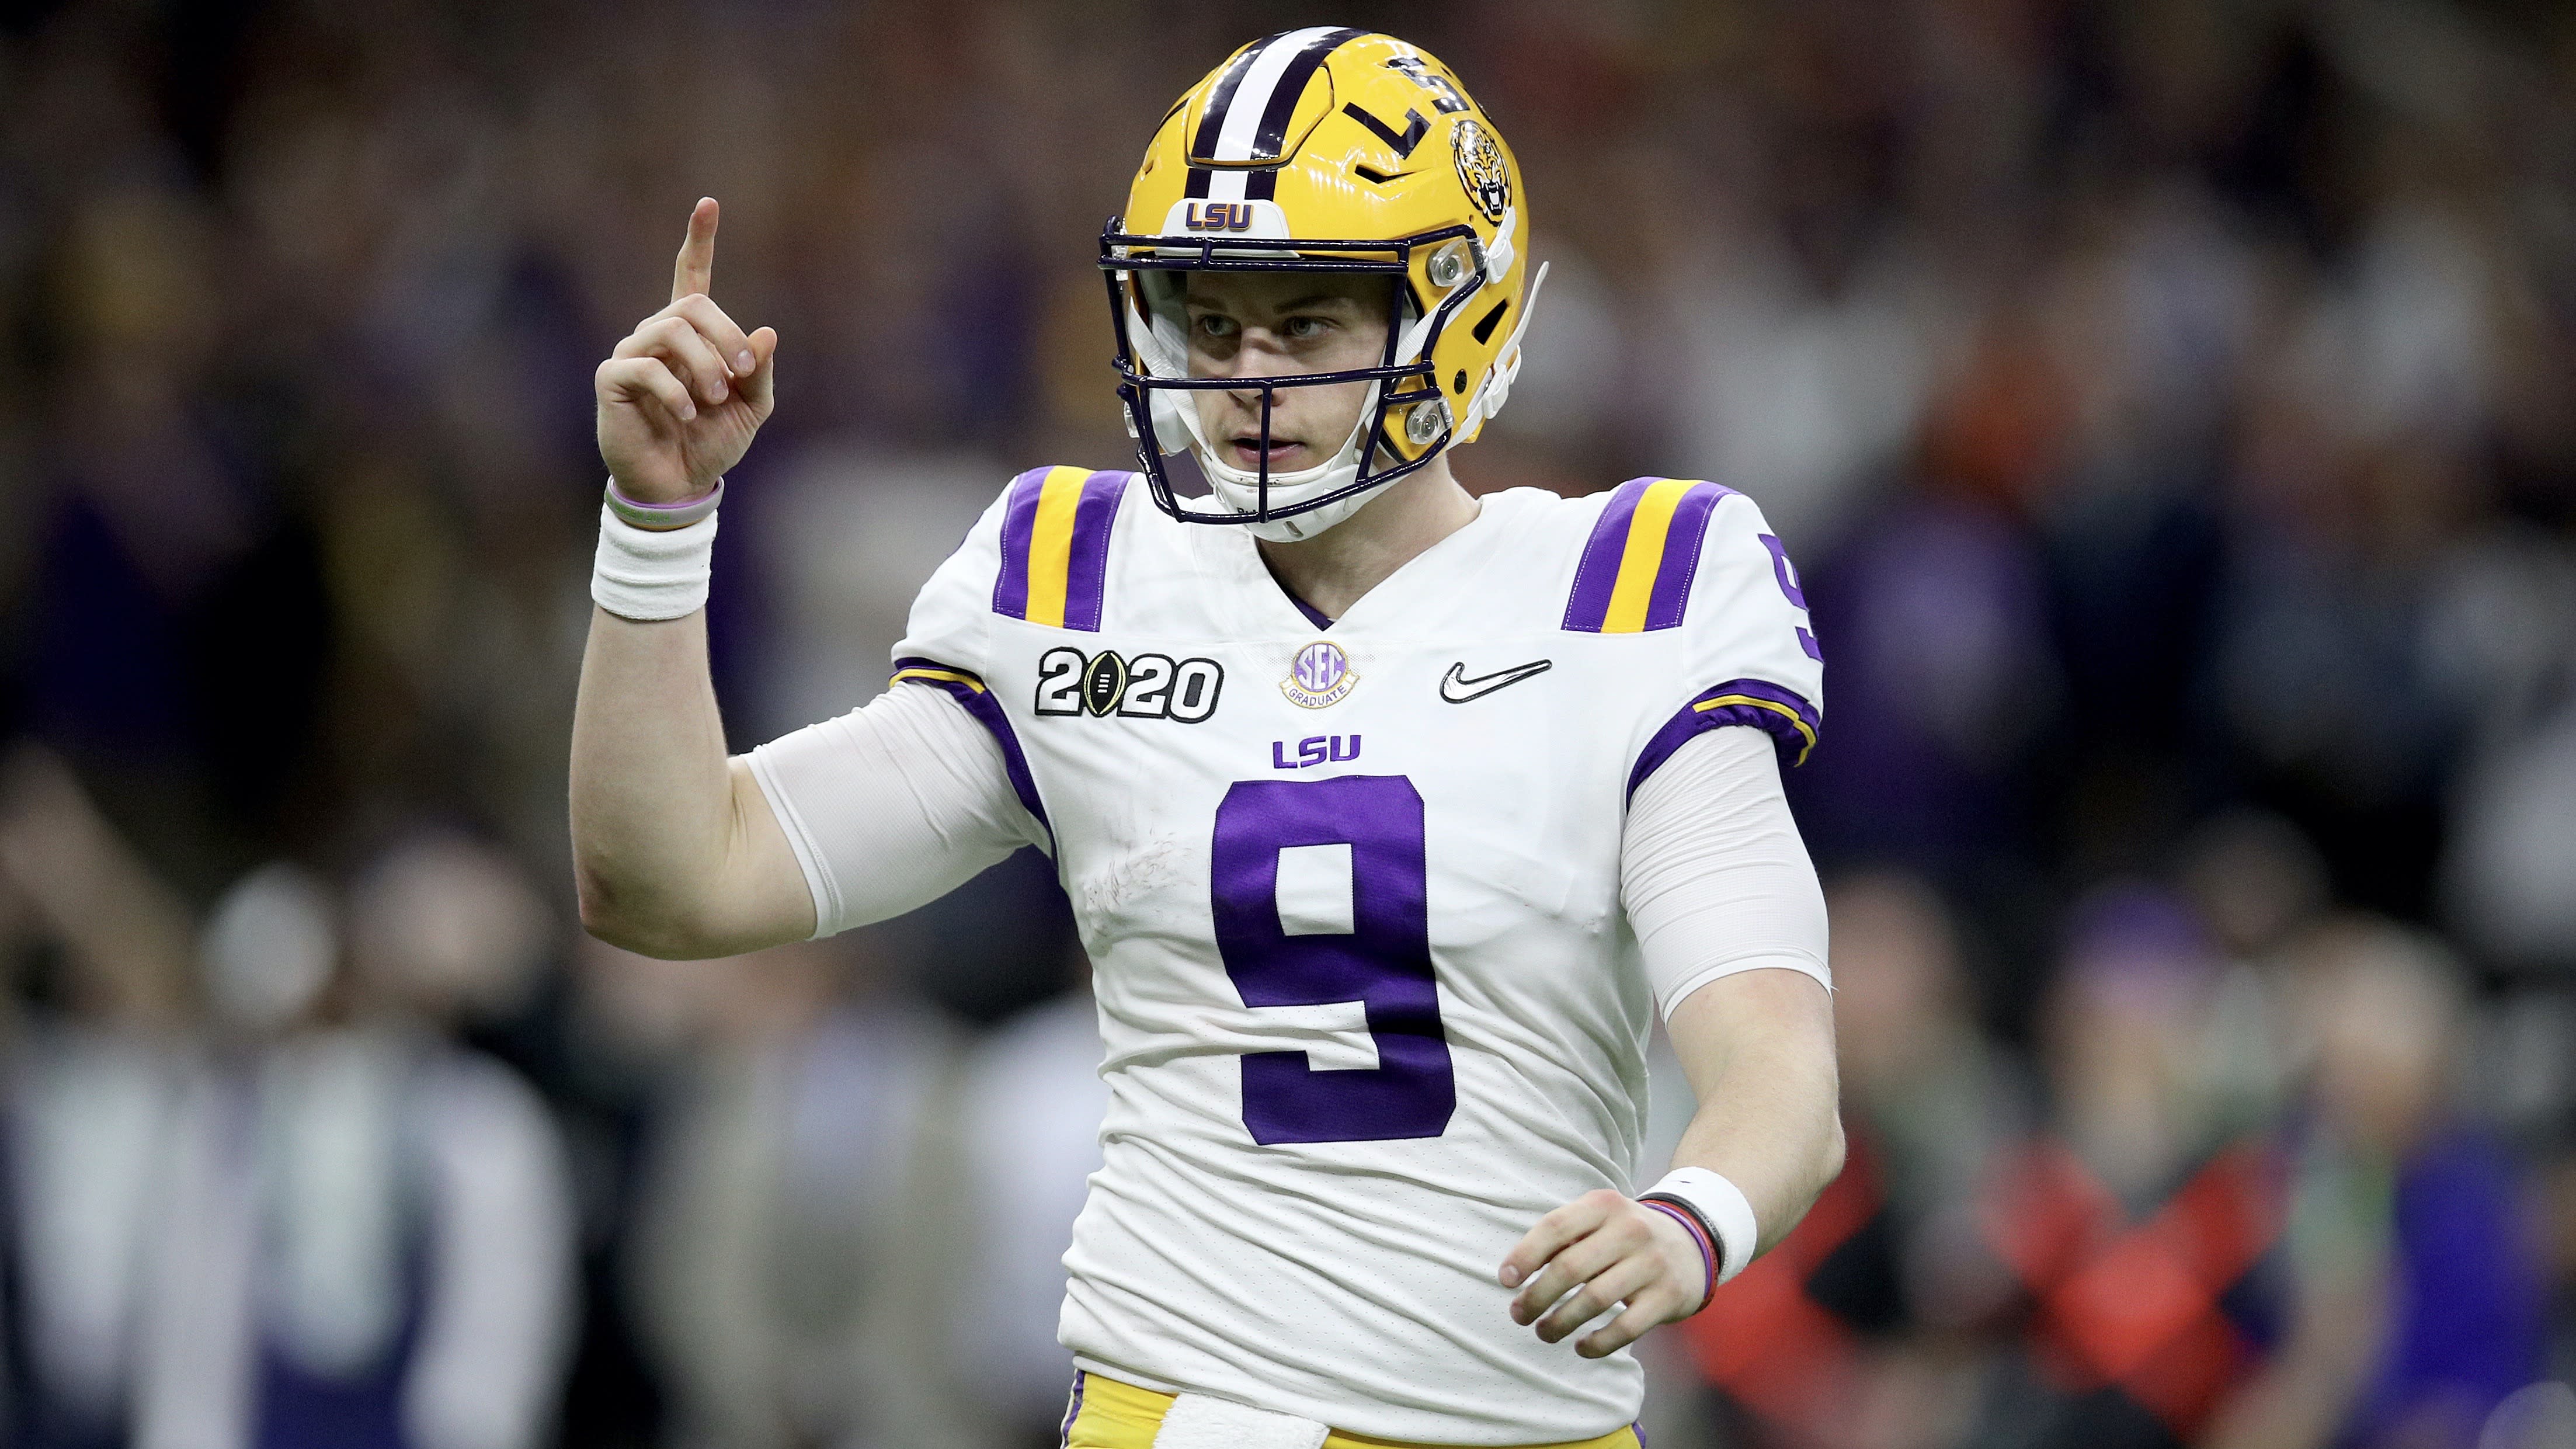 Joe Burrow could have bucked NFL draft system, but QB OK with Bengals